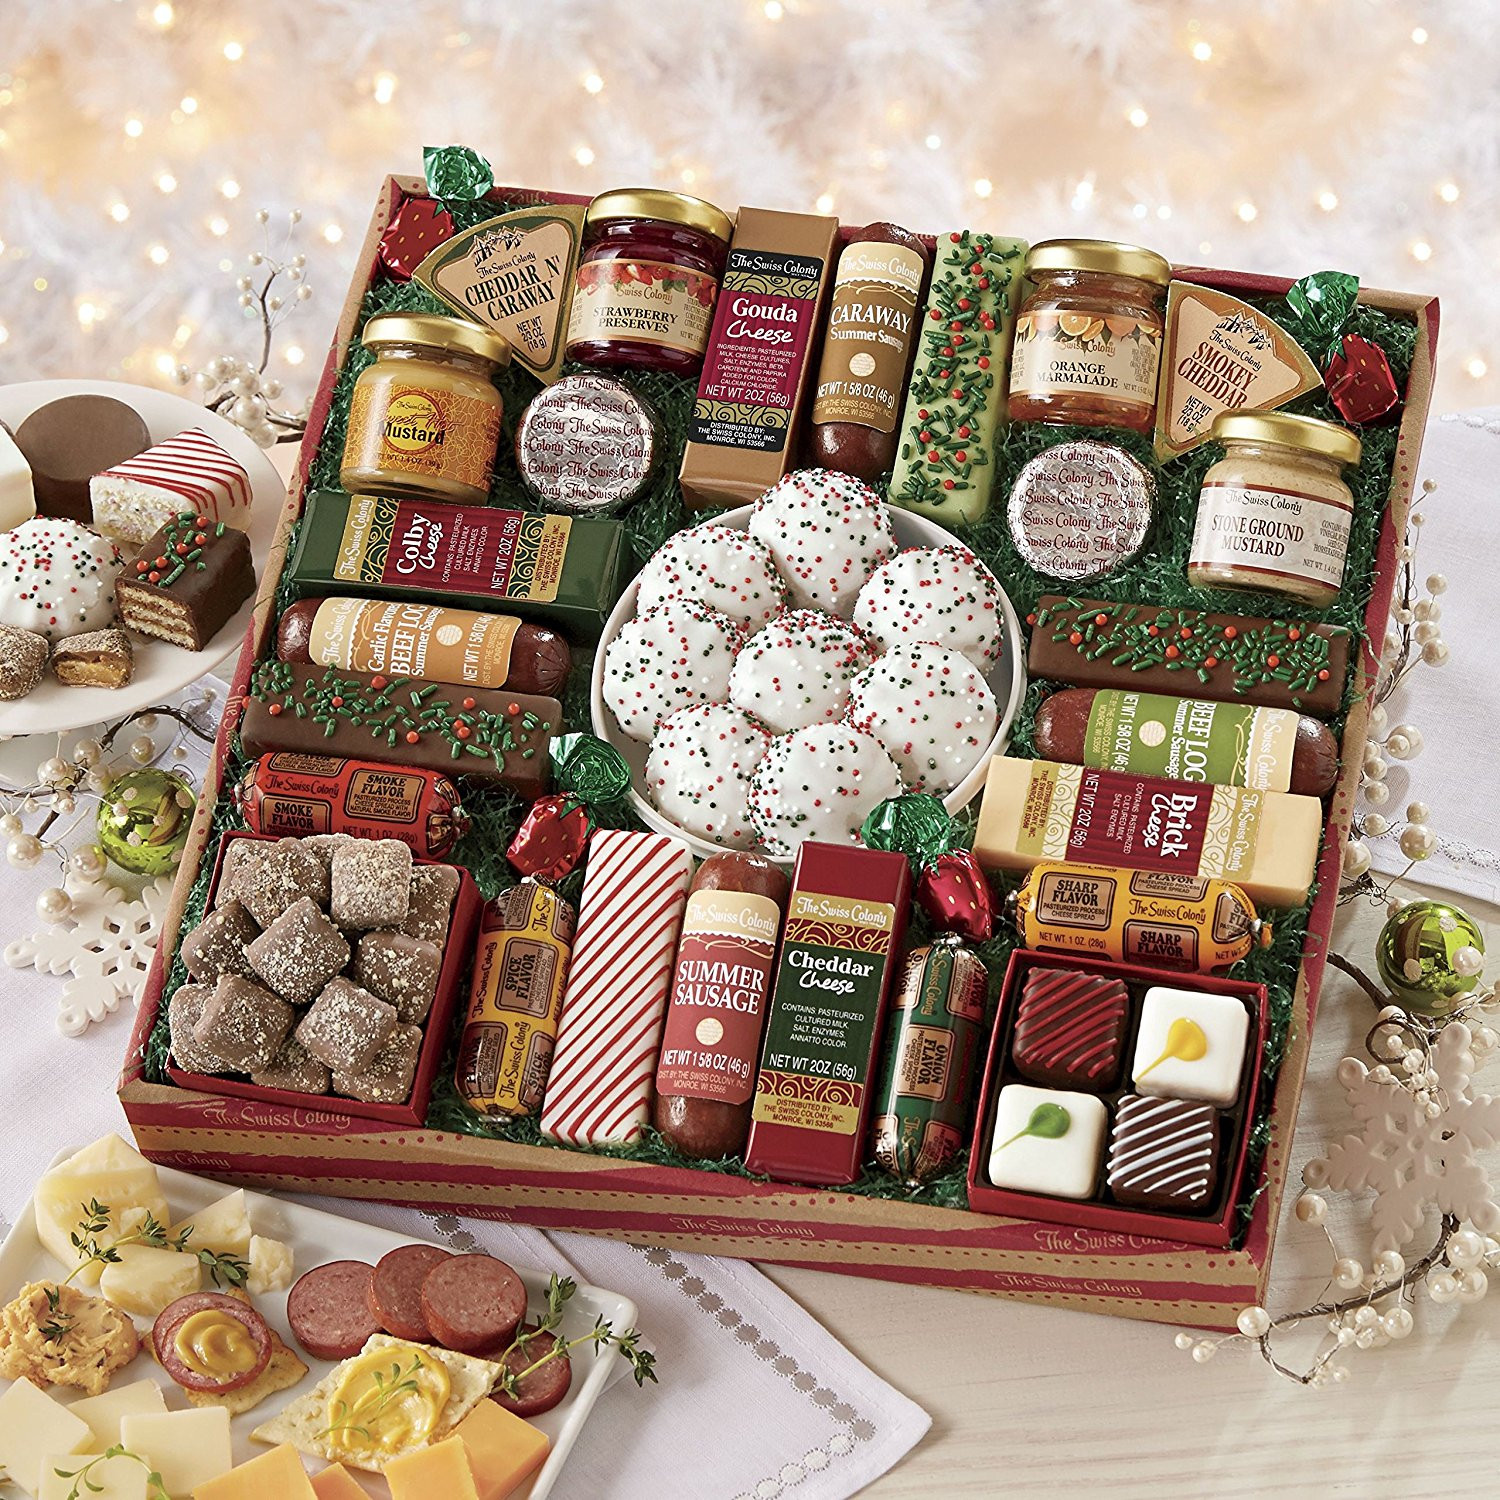 Food Gift Basket Ideas
 Gourmet Food Gift Baskets Best Cheeses Sausages Meat